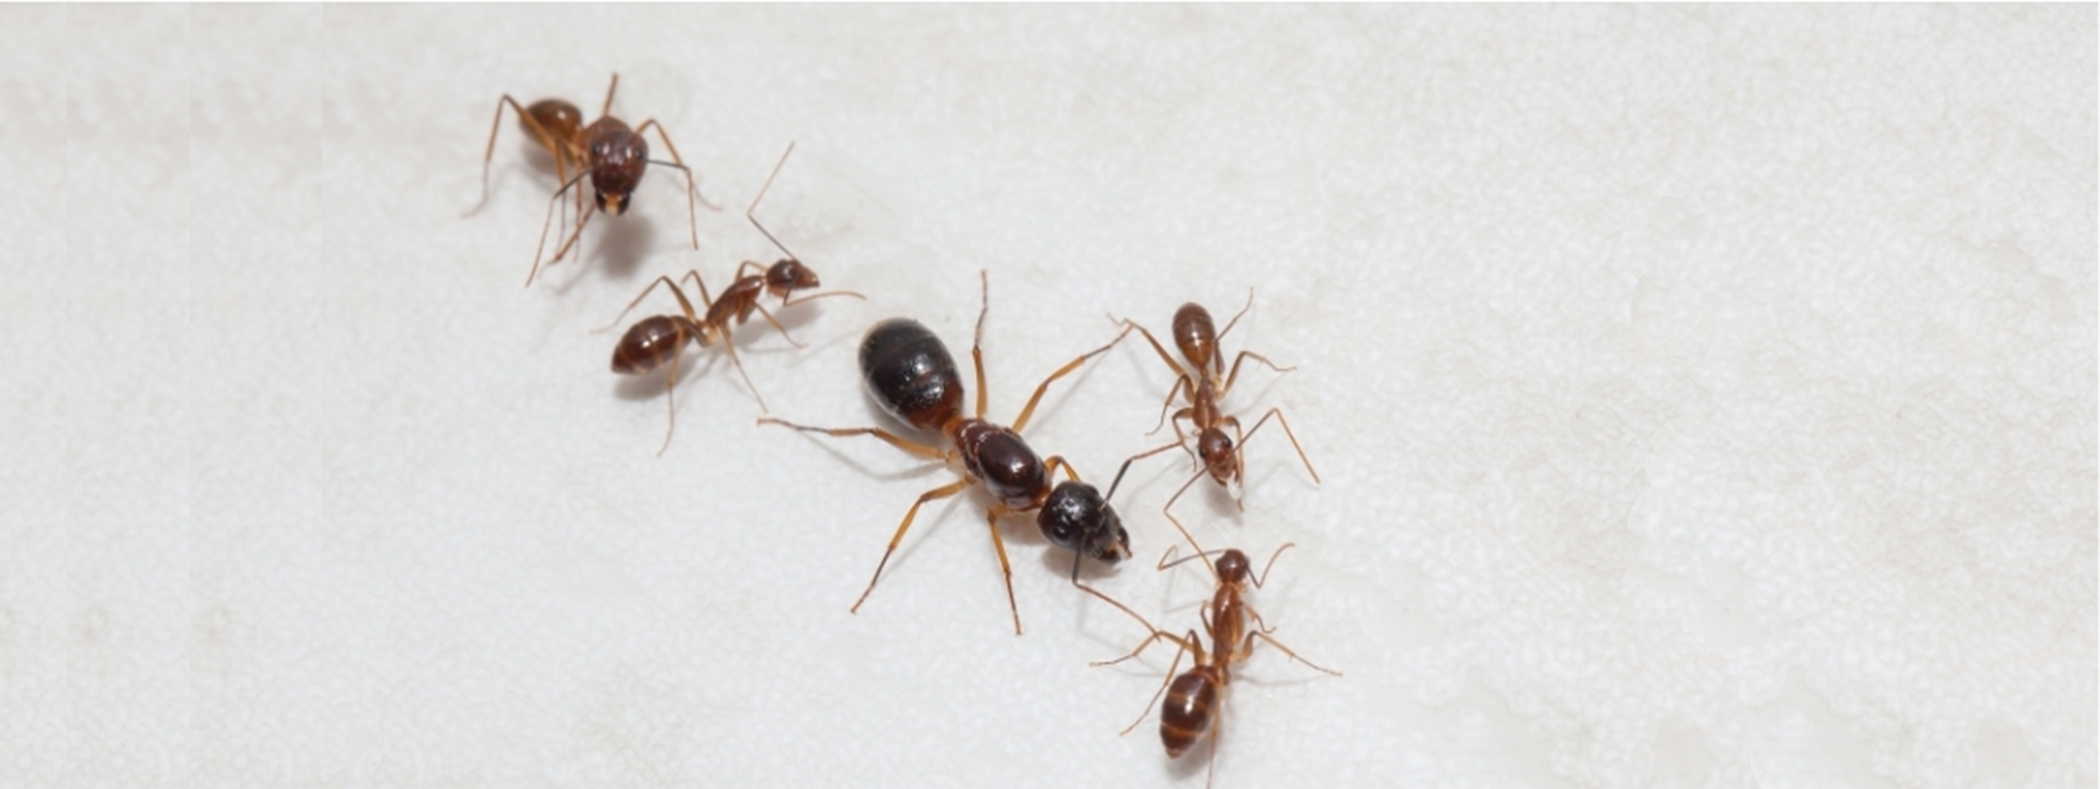 How To Identify A Queen Ant